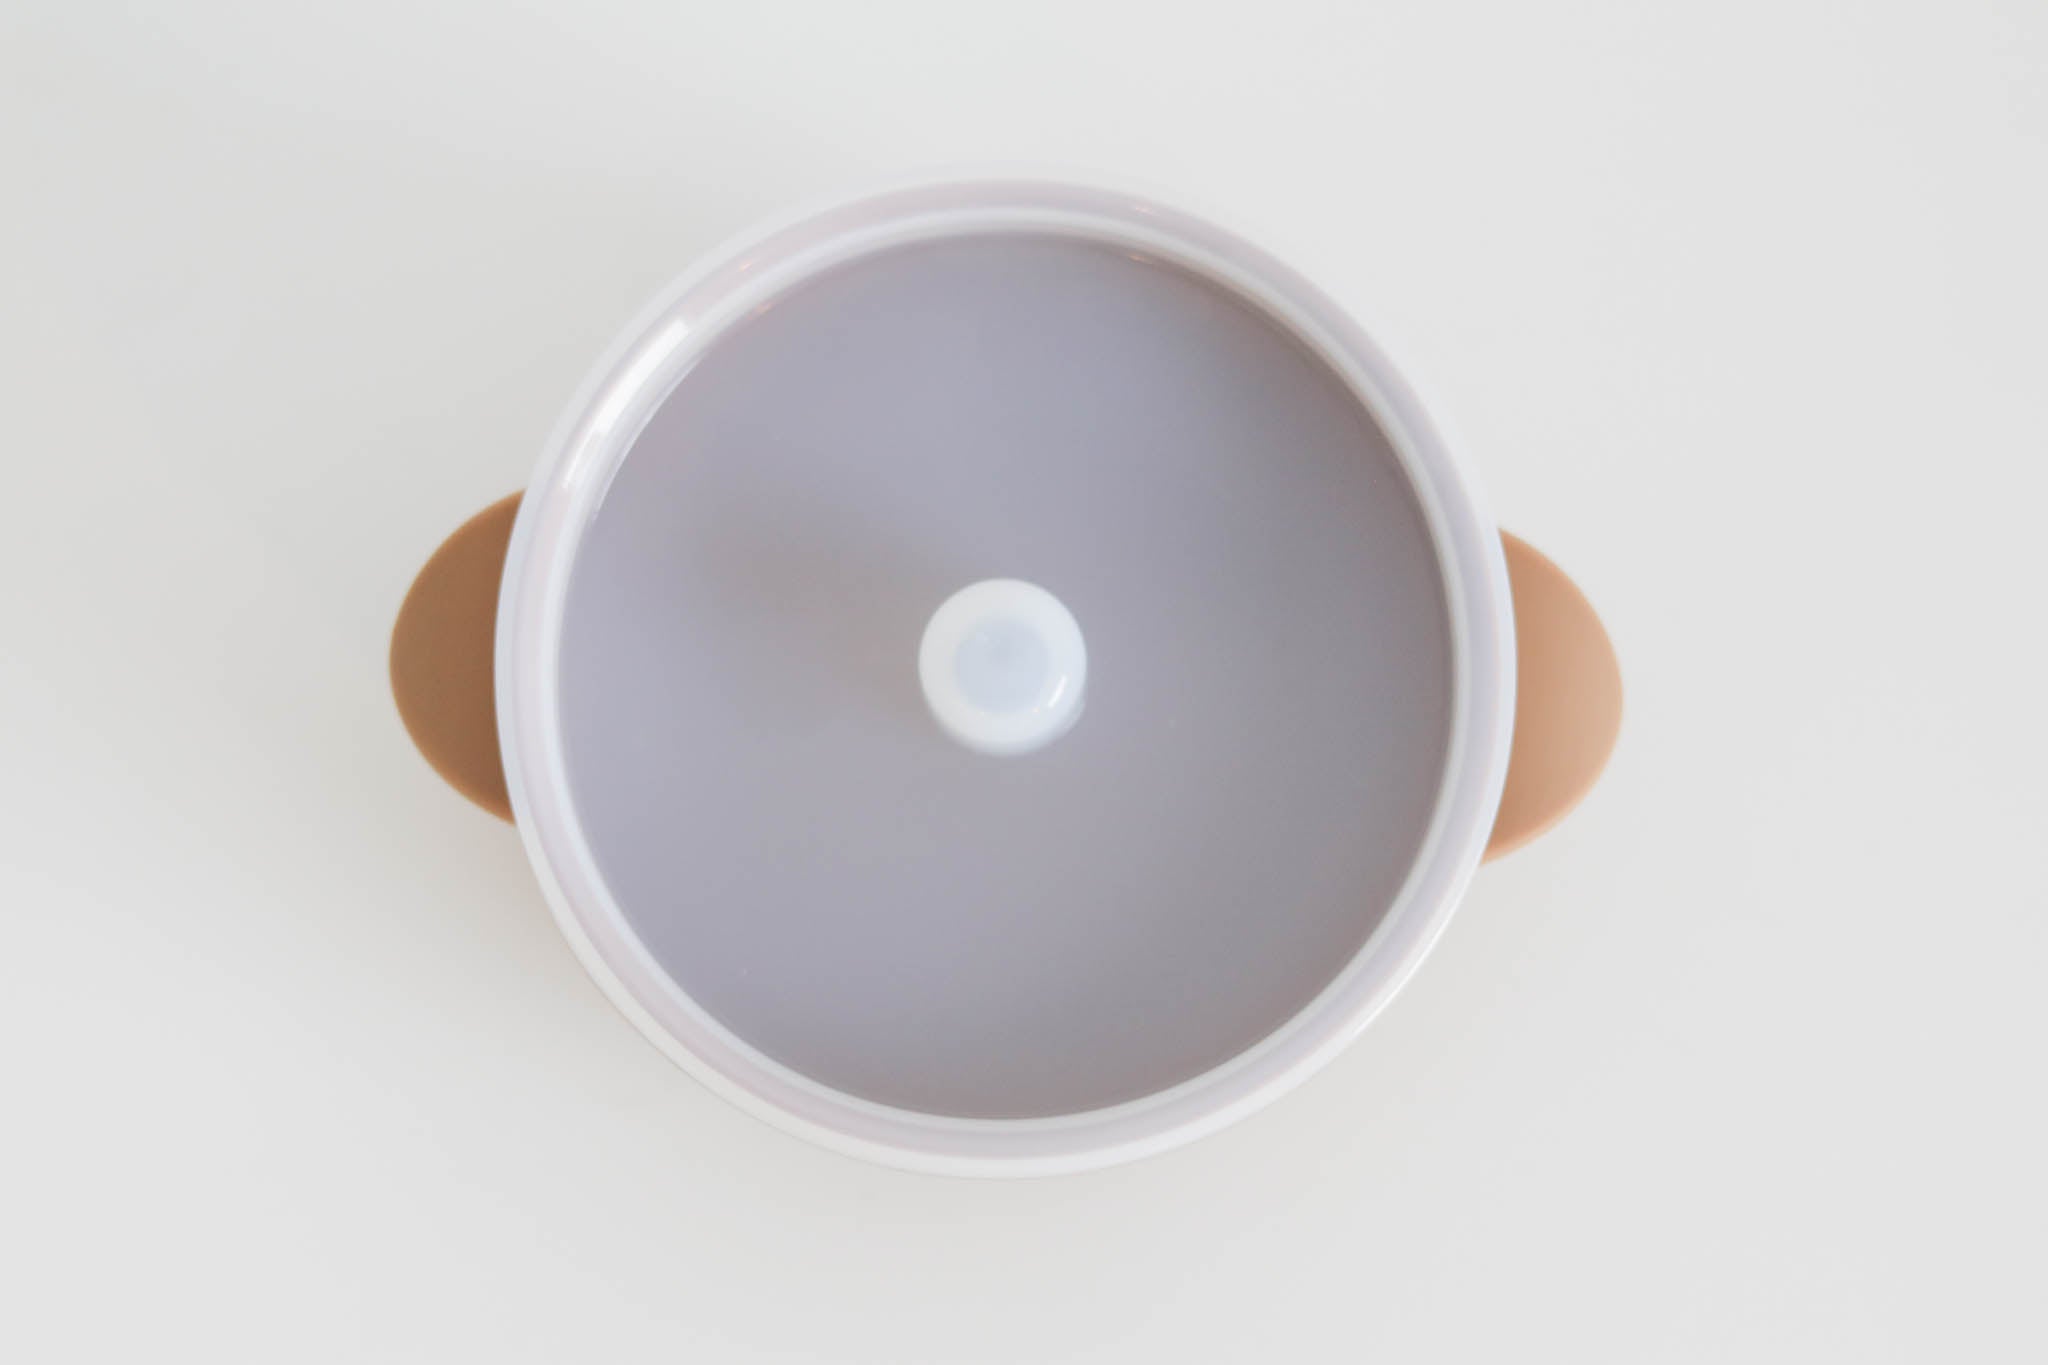 Coco Suction Bowl